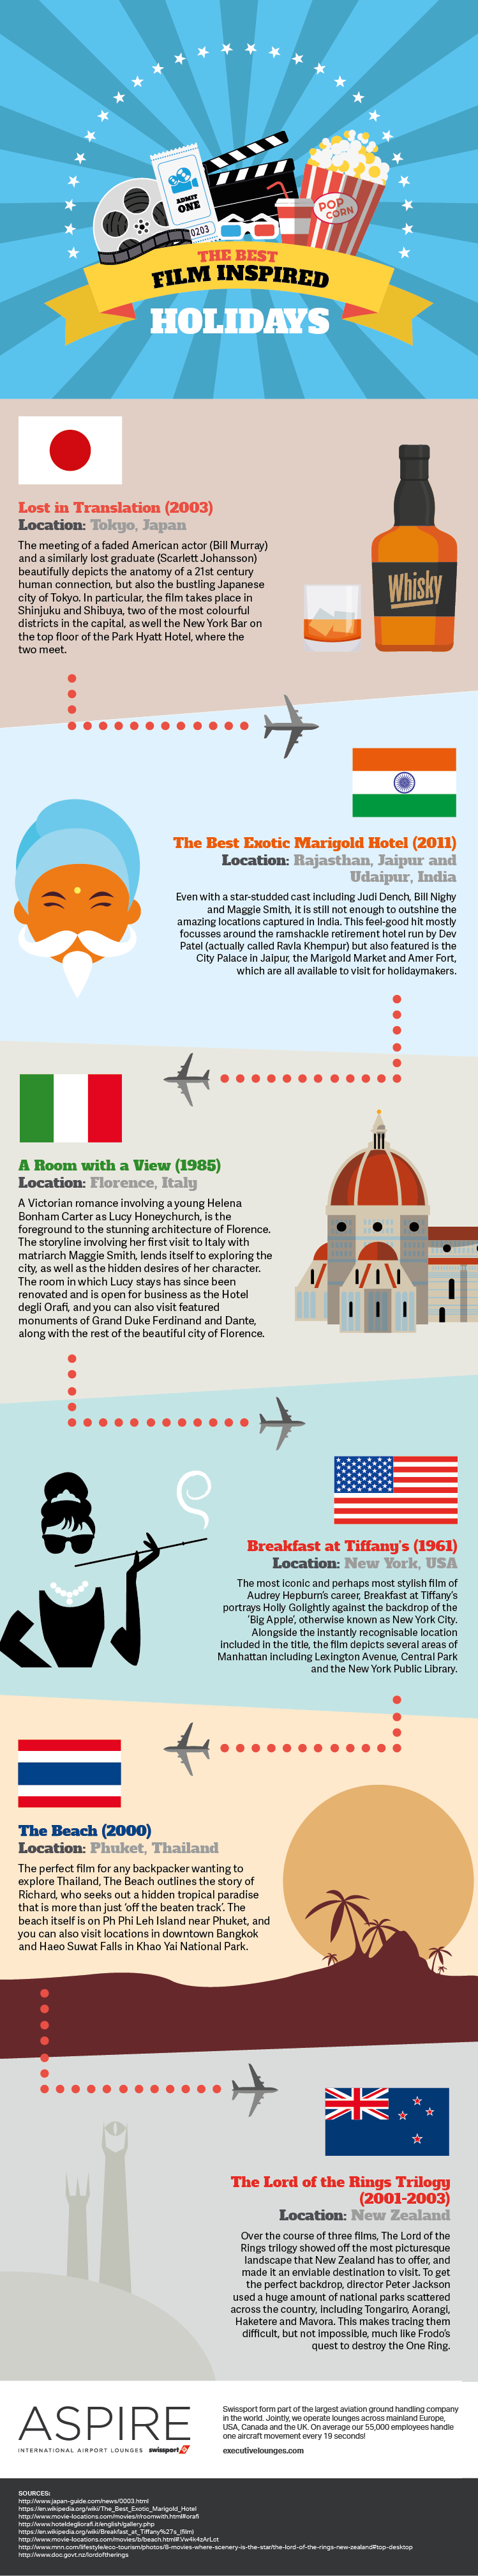 Film Inspired Holidays Infographic